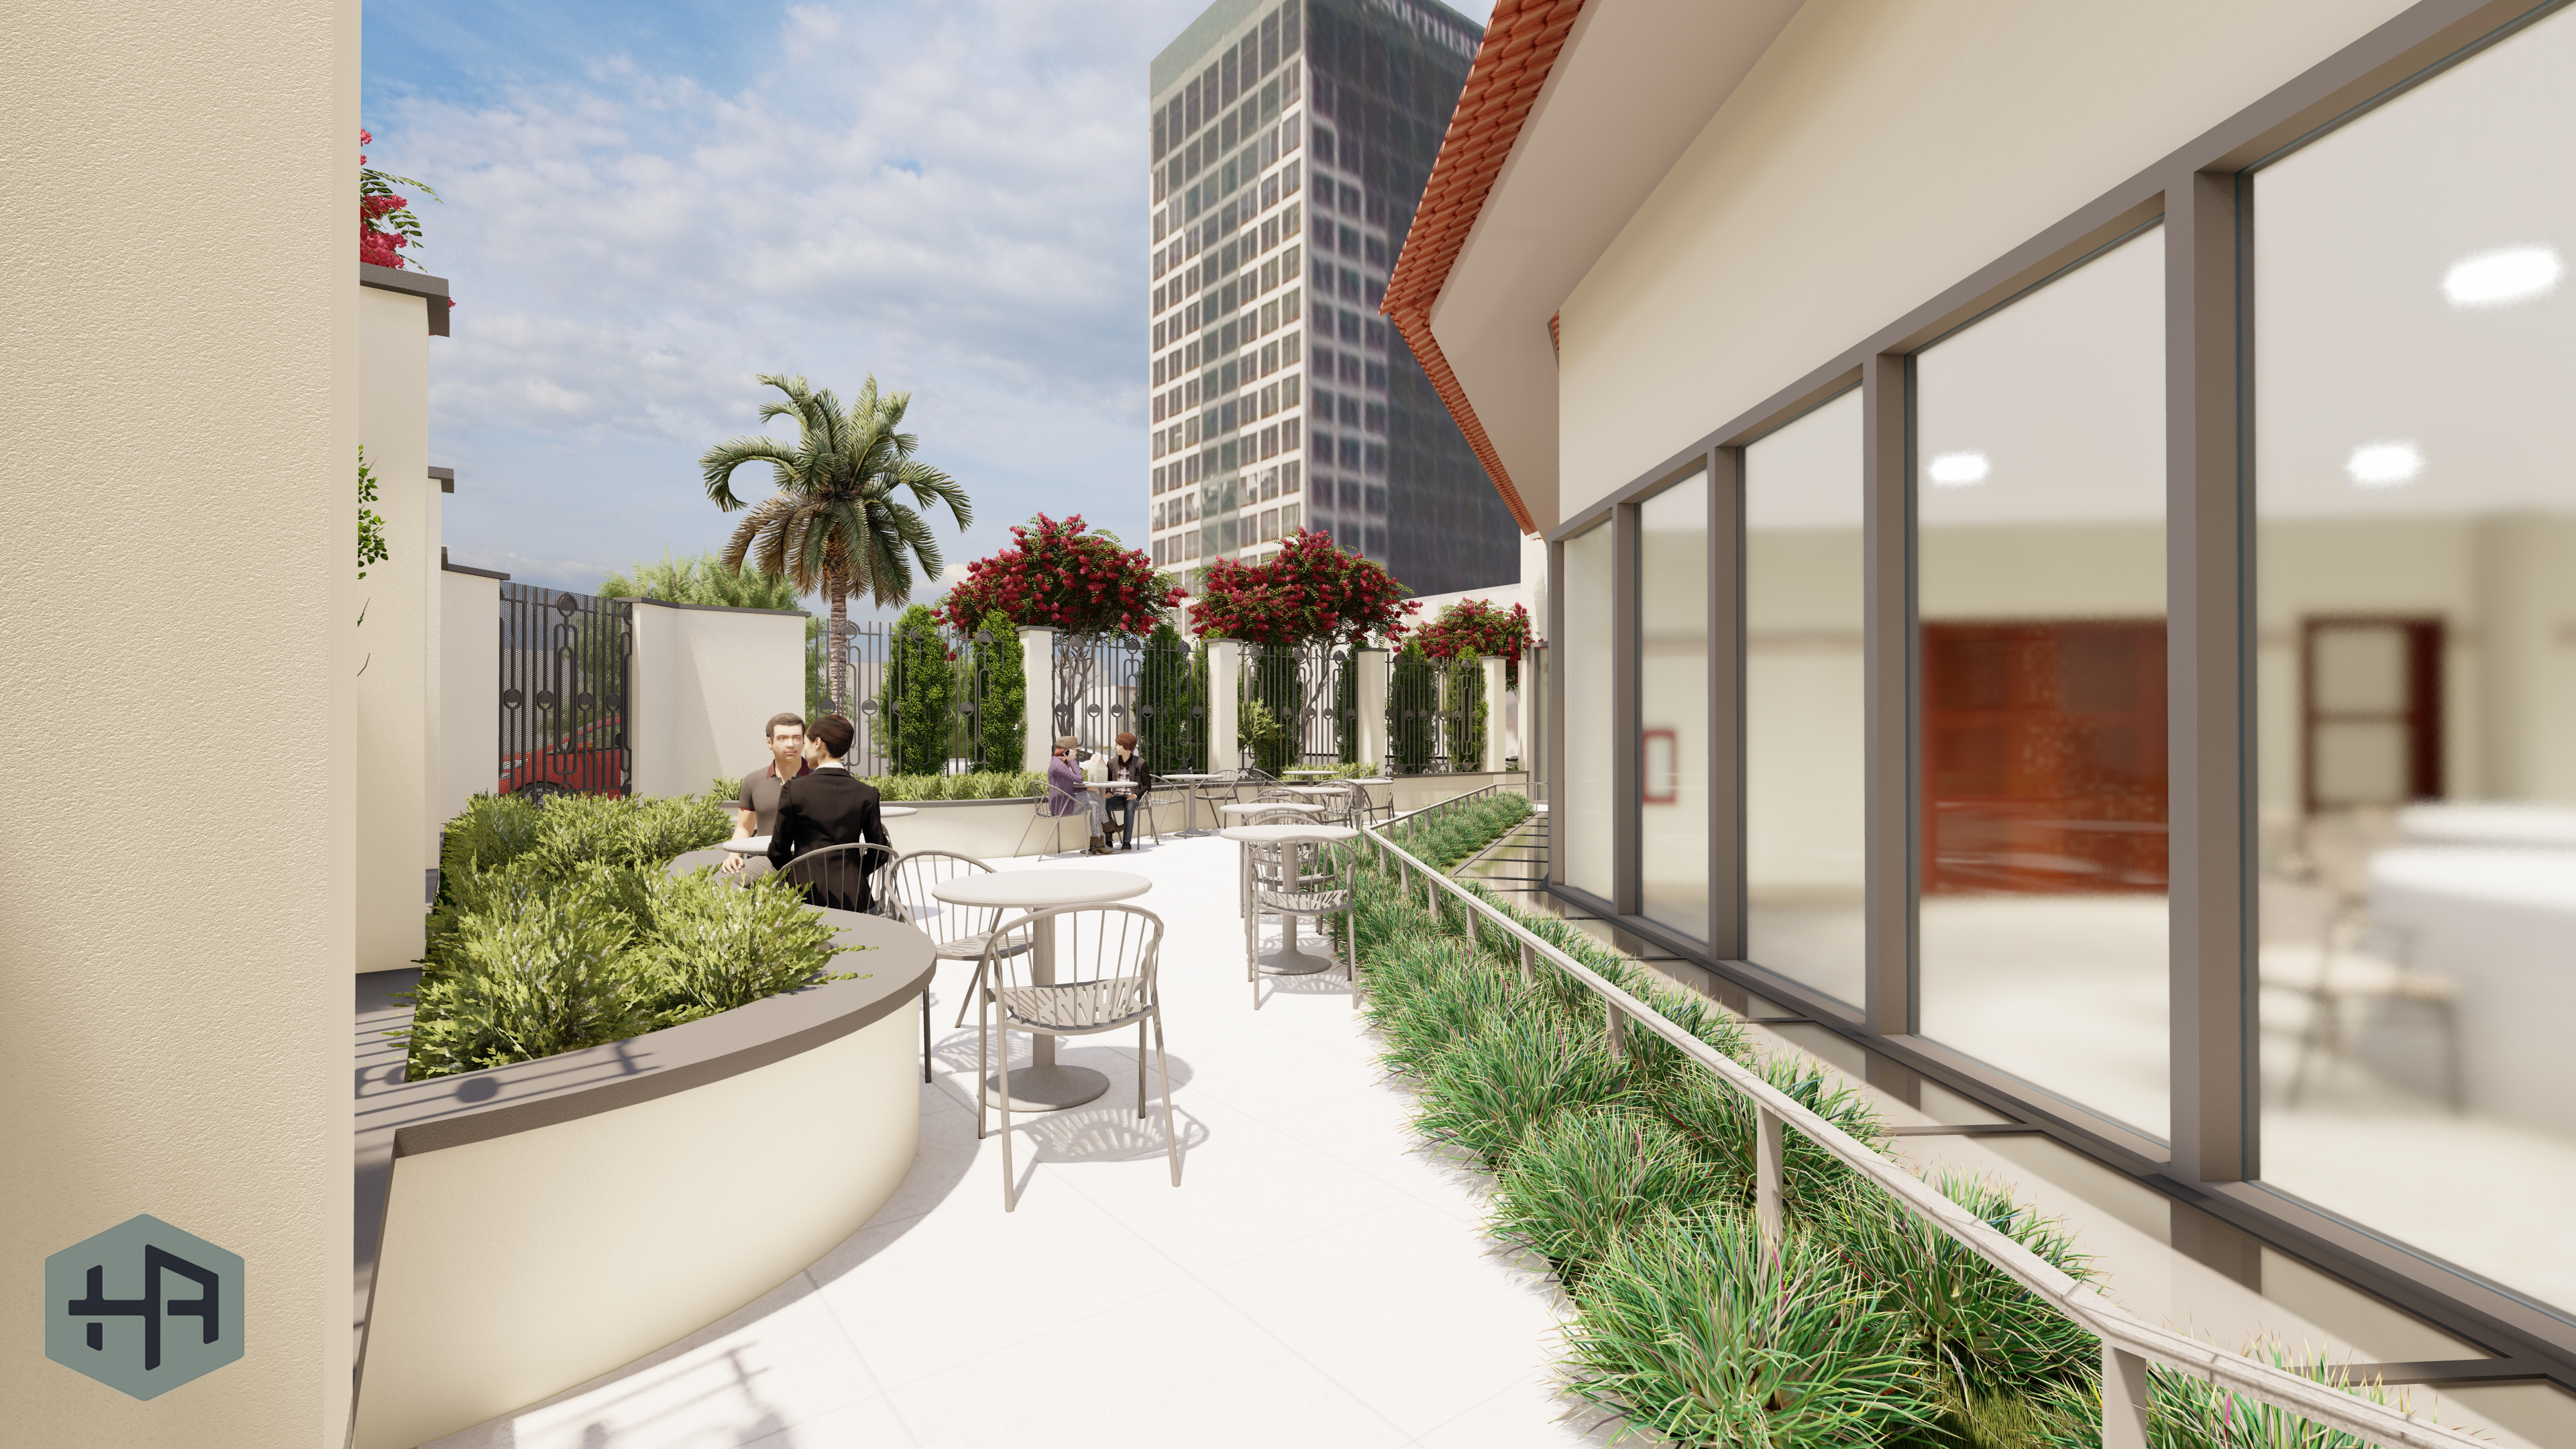 St James Courtyard Rendering Side View